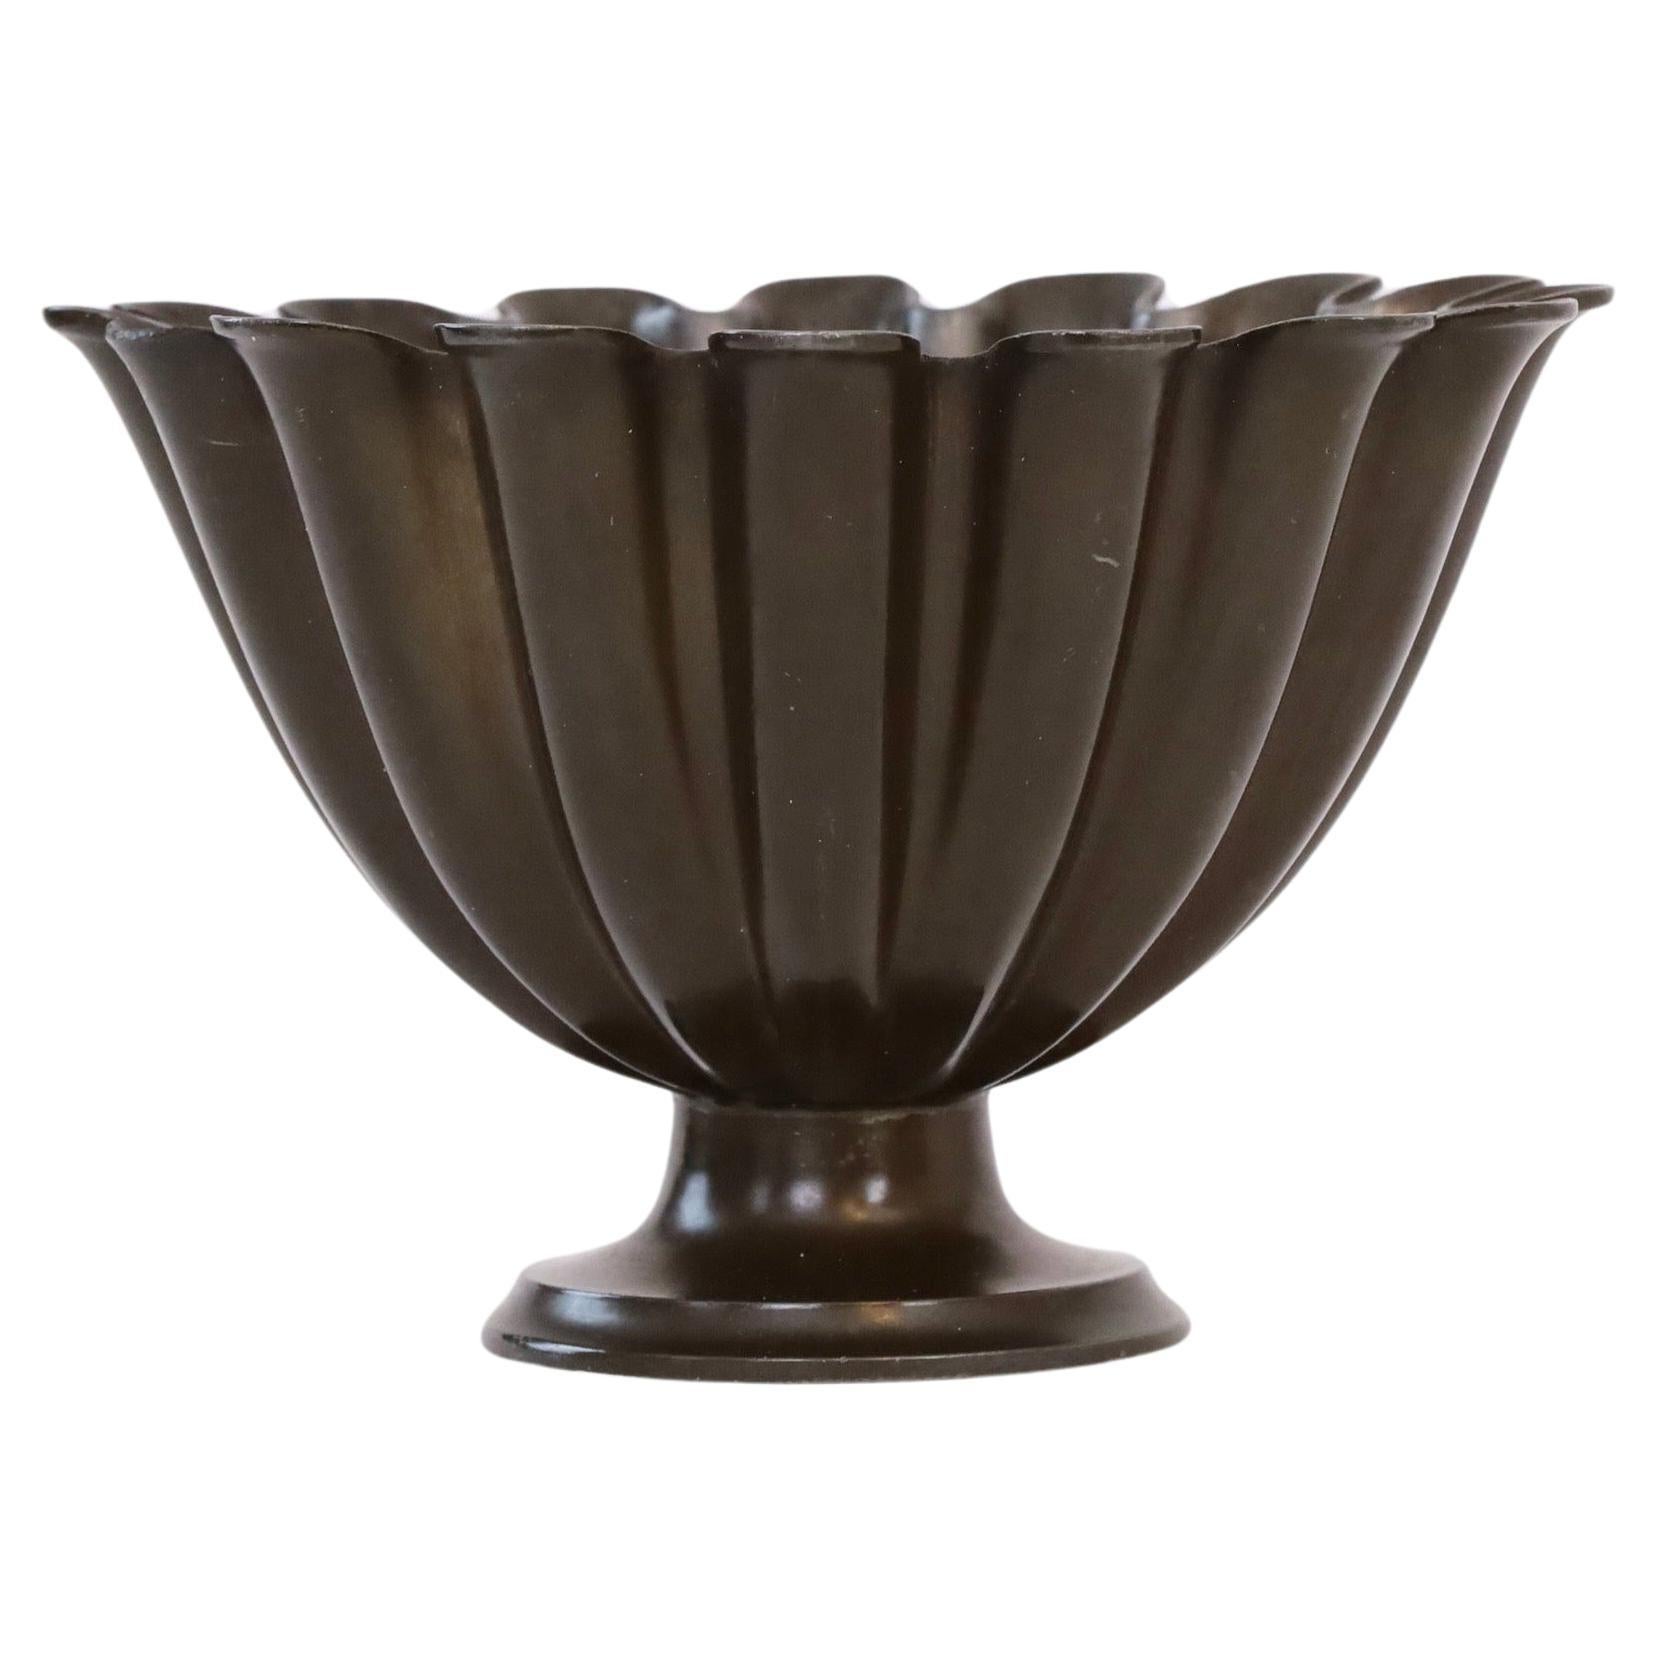 Scalloped pedestal discometal bowl by Just Andersen 1920s, Denmark For Sale